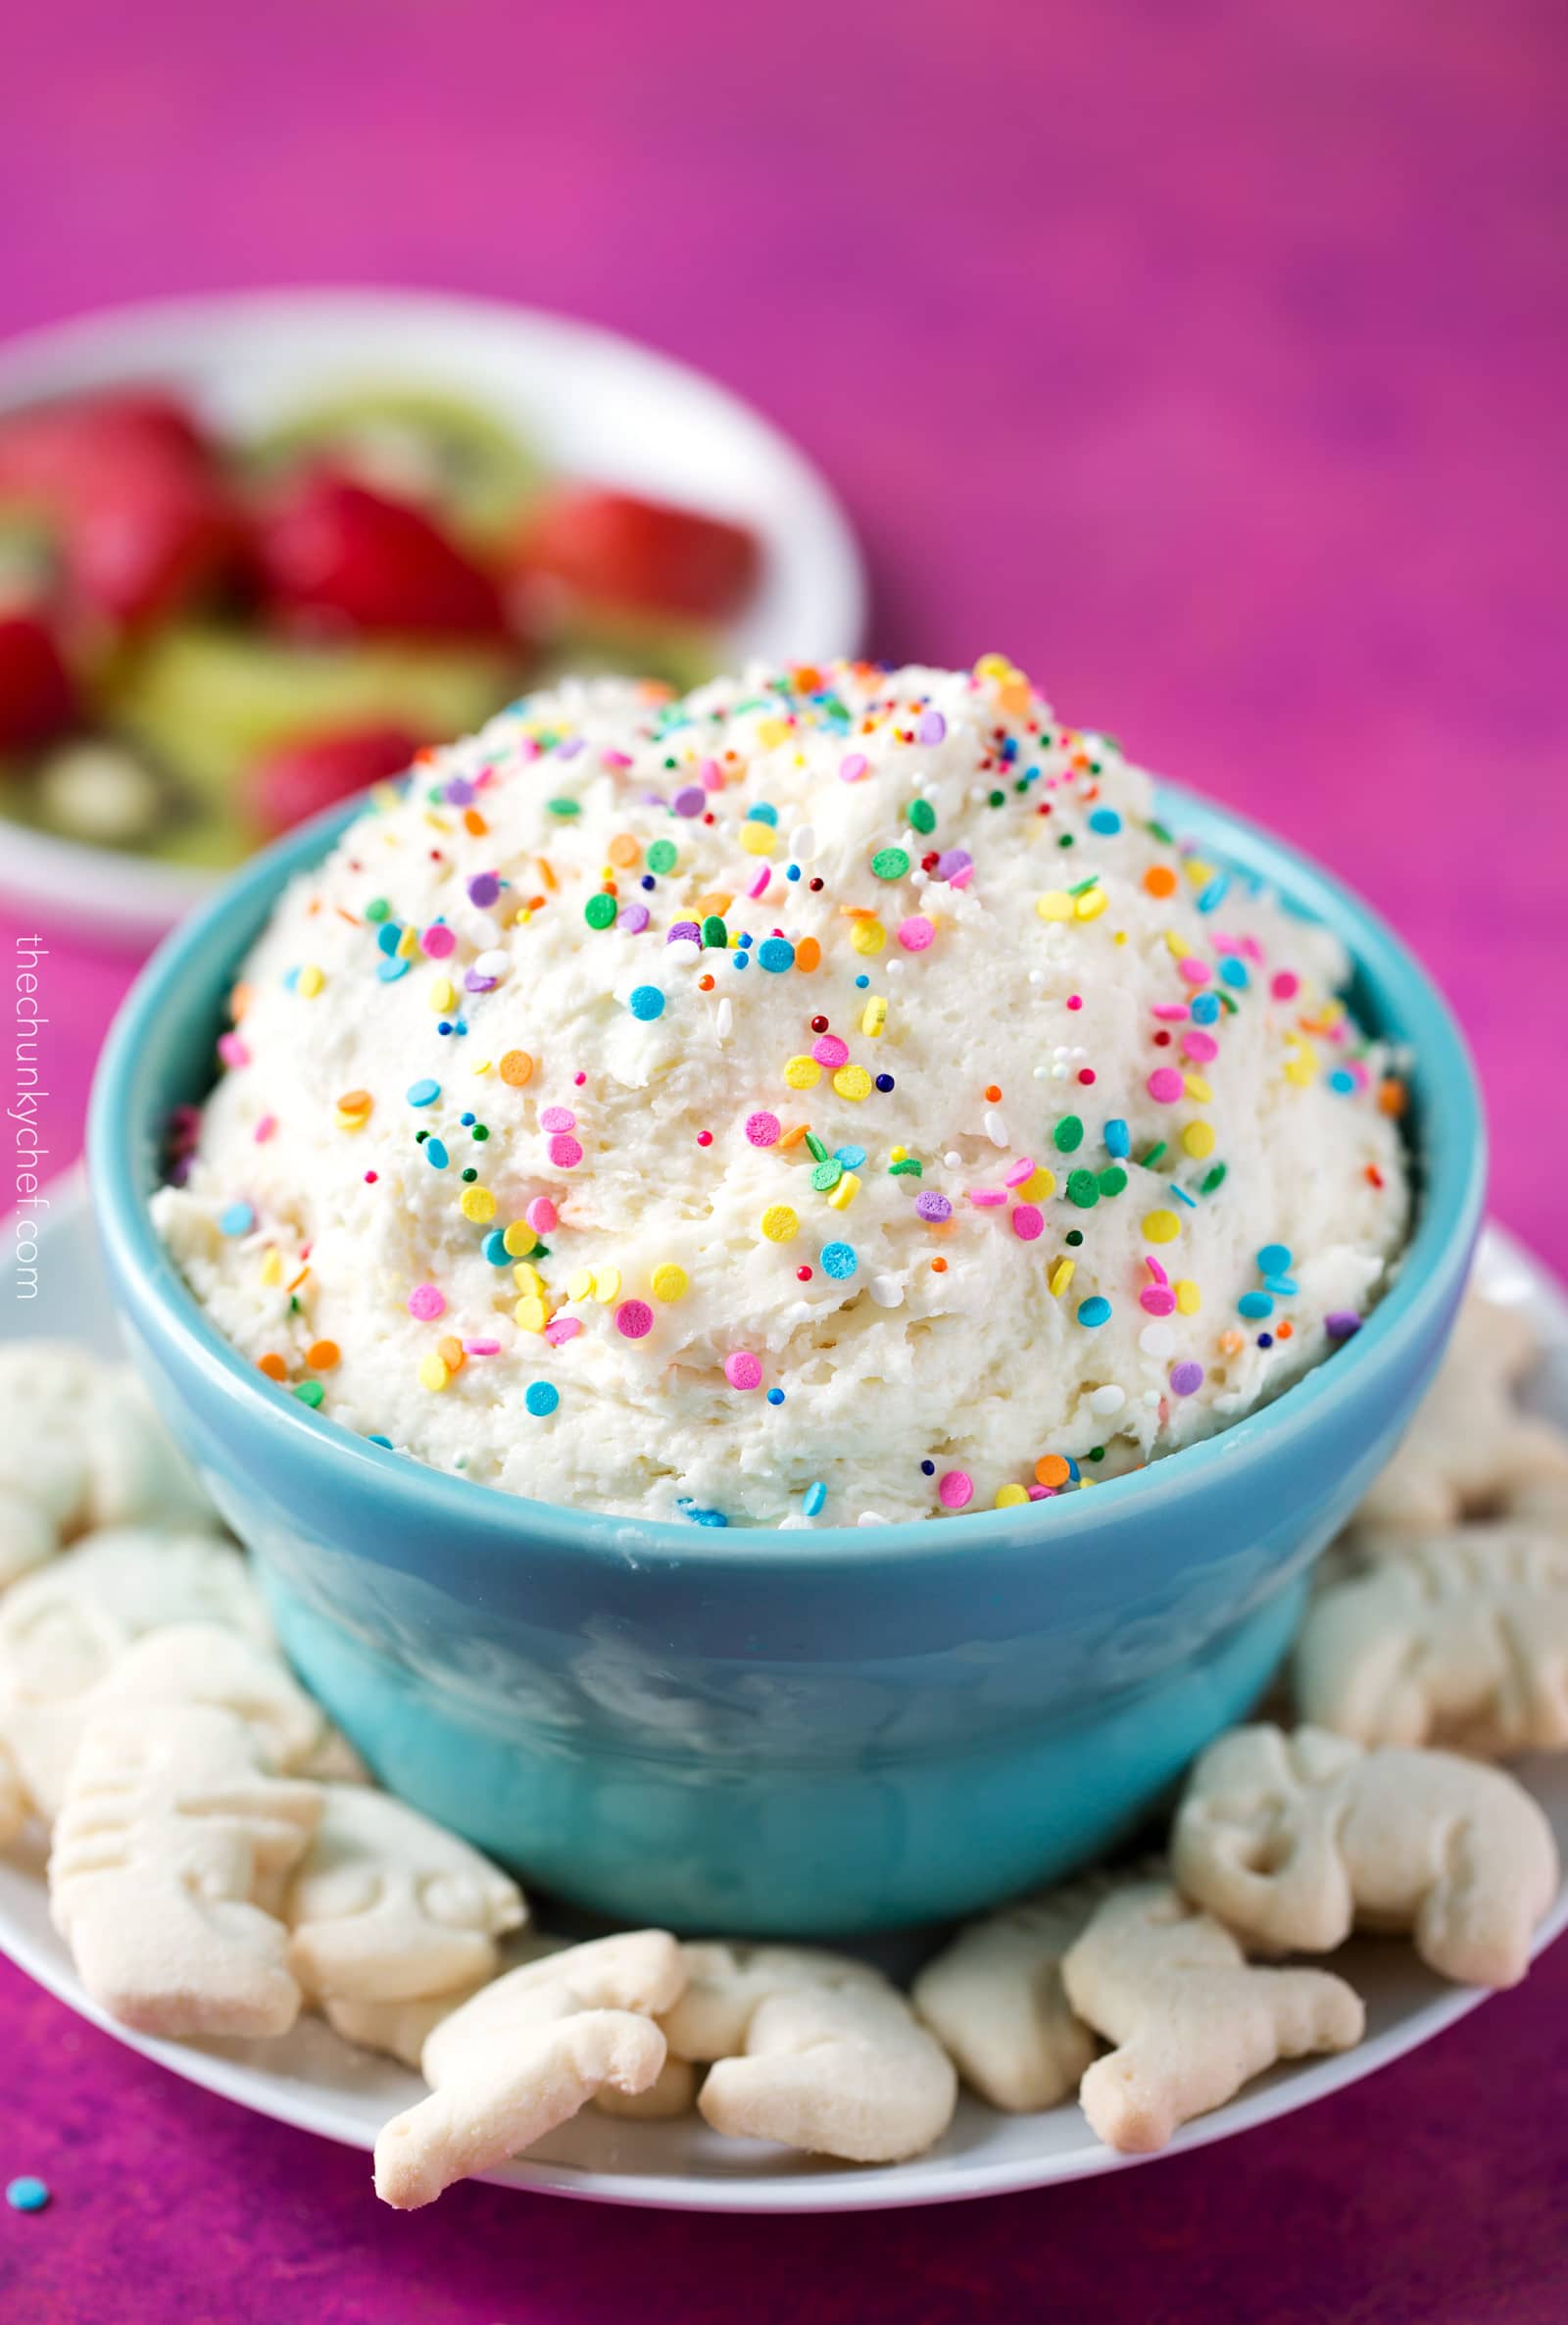 Four Ingredient Funfetti Cake Batter Dip - The Chunky Chef1600 x 2372